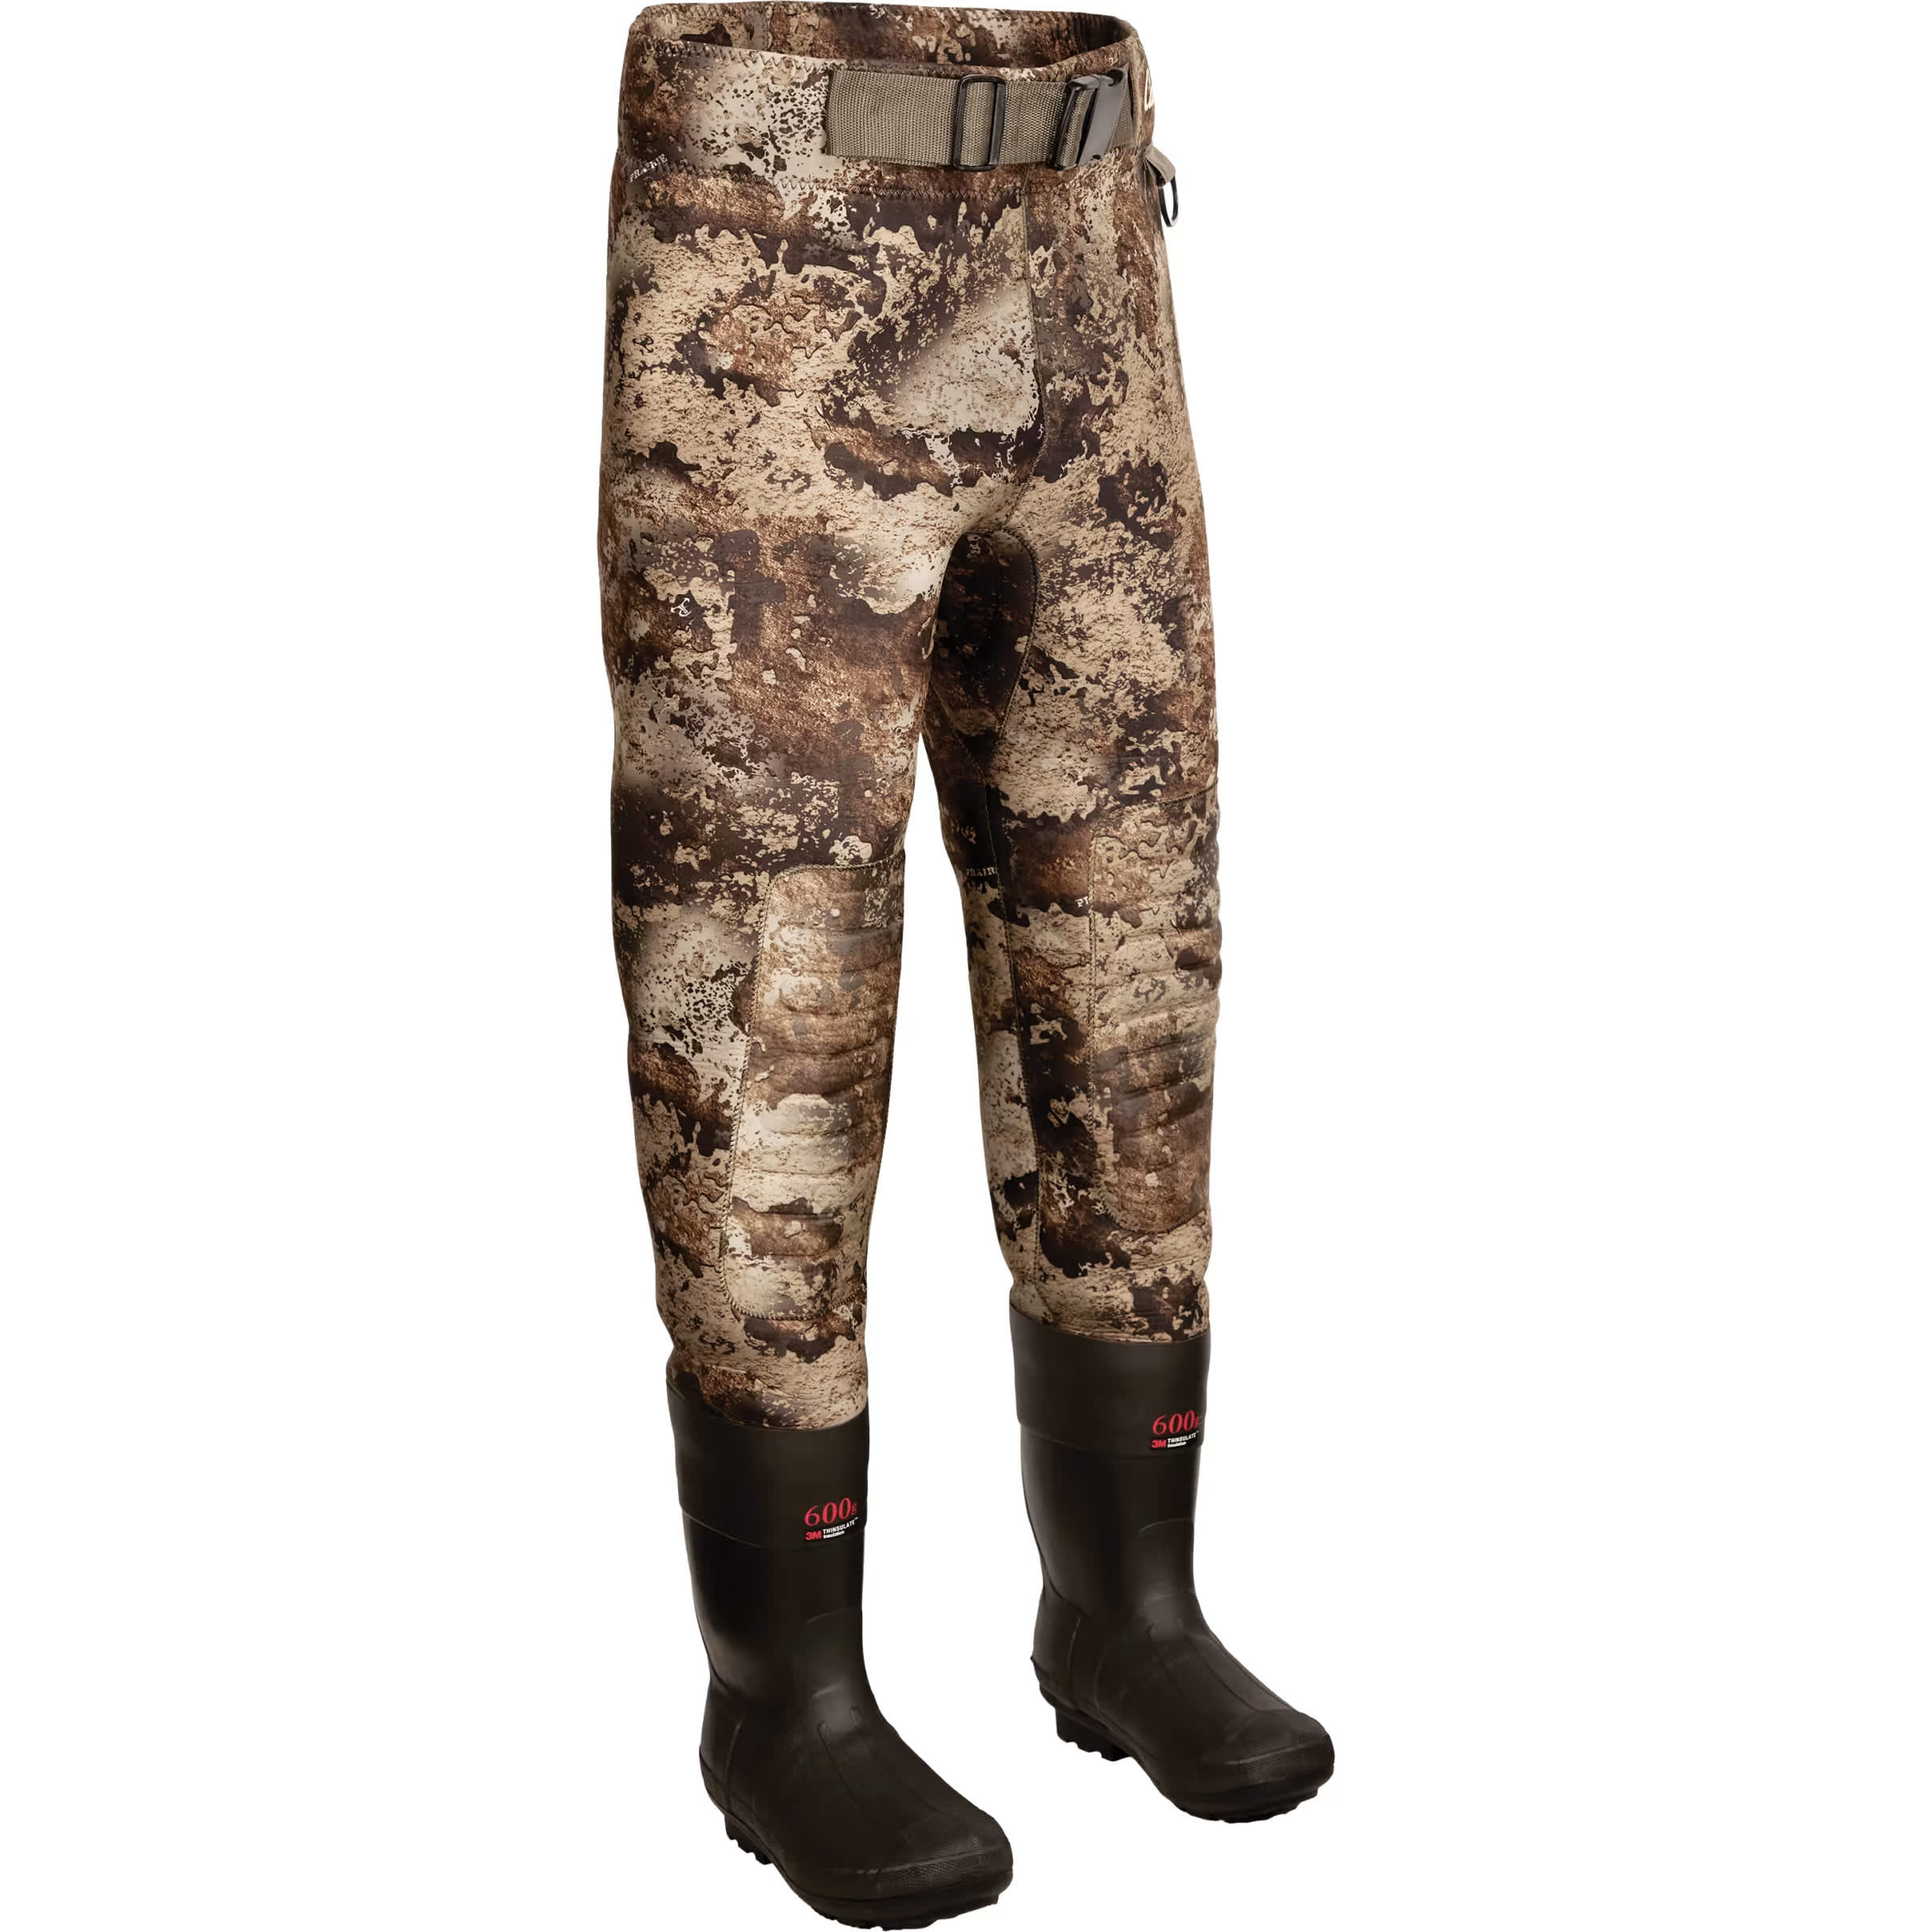 Cabela’s® Men’s Classic 3.5mm Waist High Hunting Waders